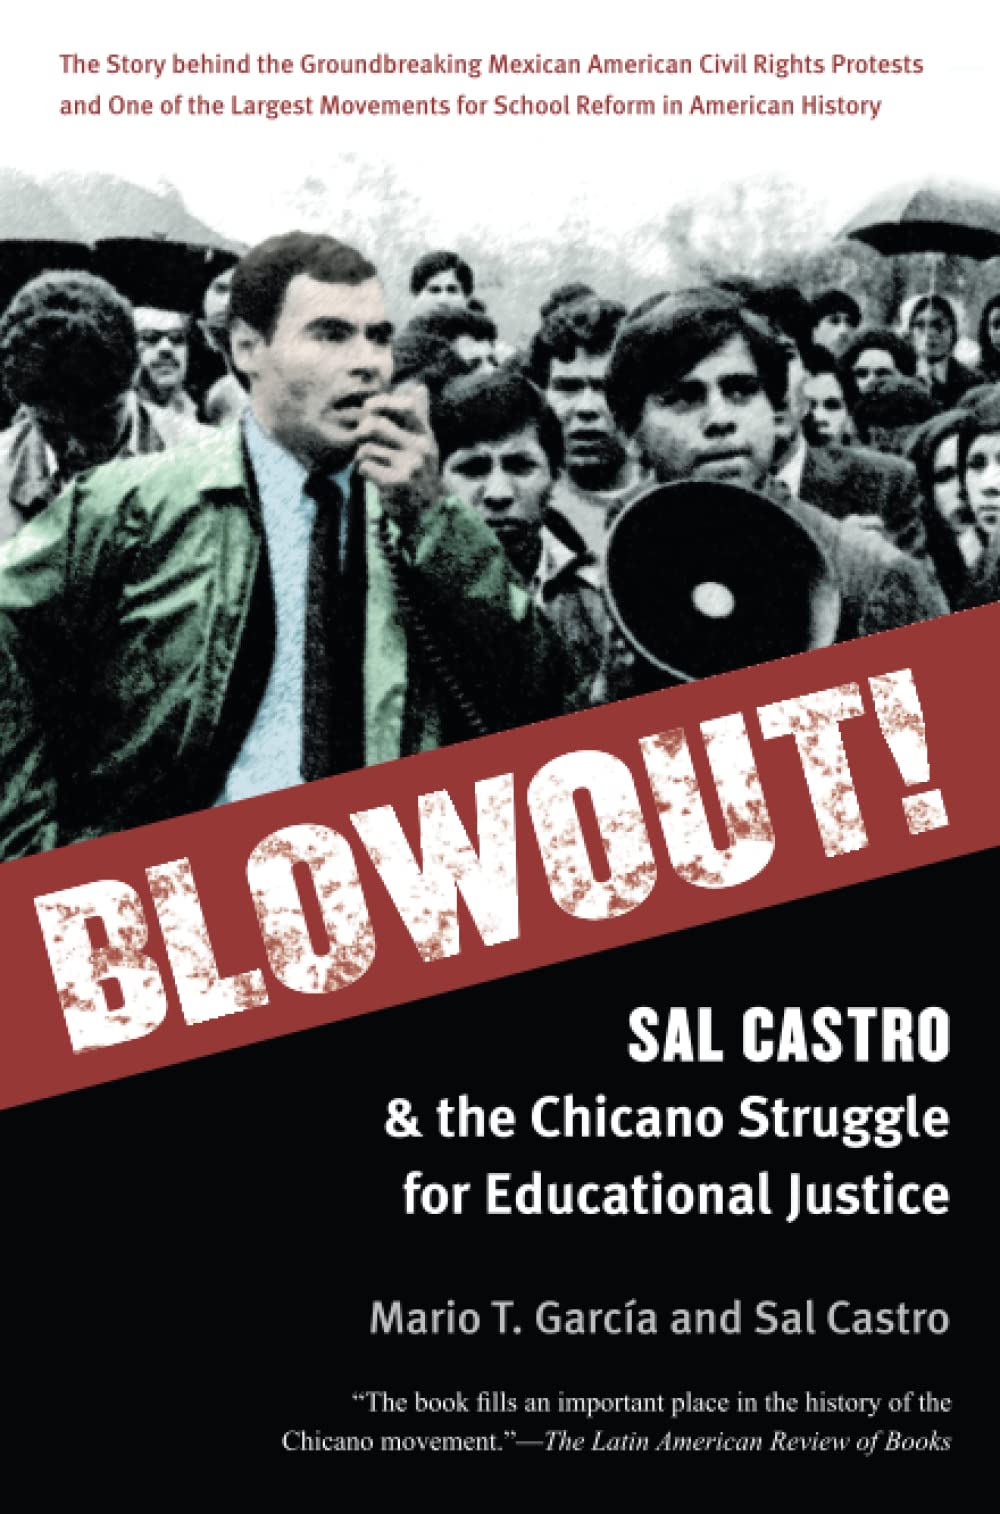 Blowout!: Sal Castro and the Chicano Struggle for Educational Justice by Mario T. García, Sal Castro